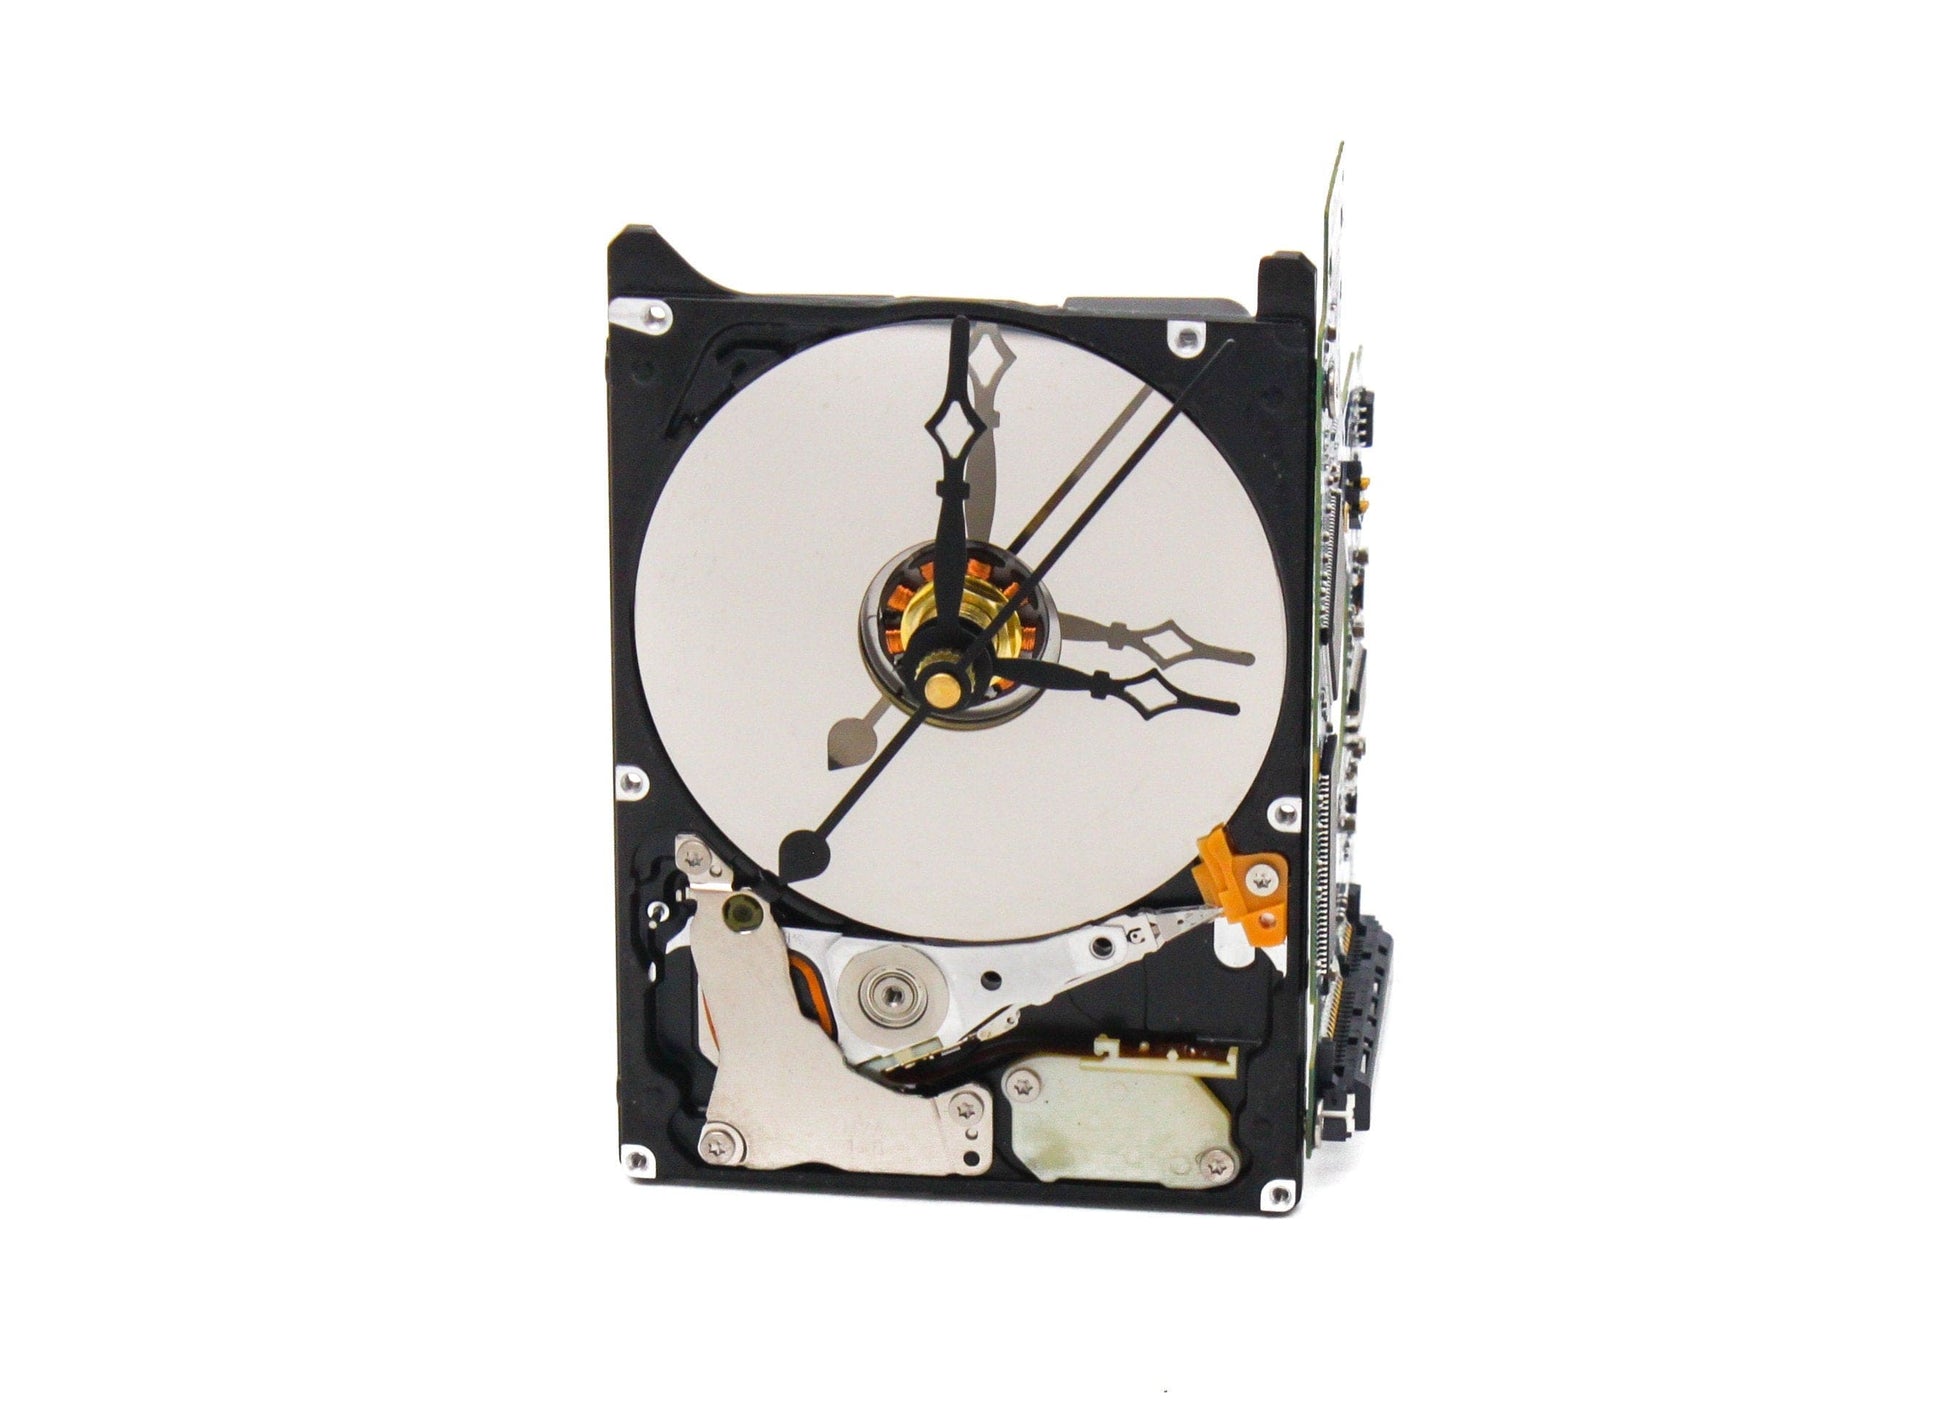 LightAndTimeArt Harddrive Clock Mini-Me Upcycled Black & Silver Hard Drive Clock and Circuit Board stand - Modern Desk Clock - Gift for geeks - gift for IT